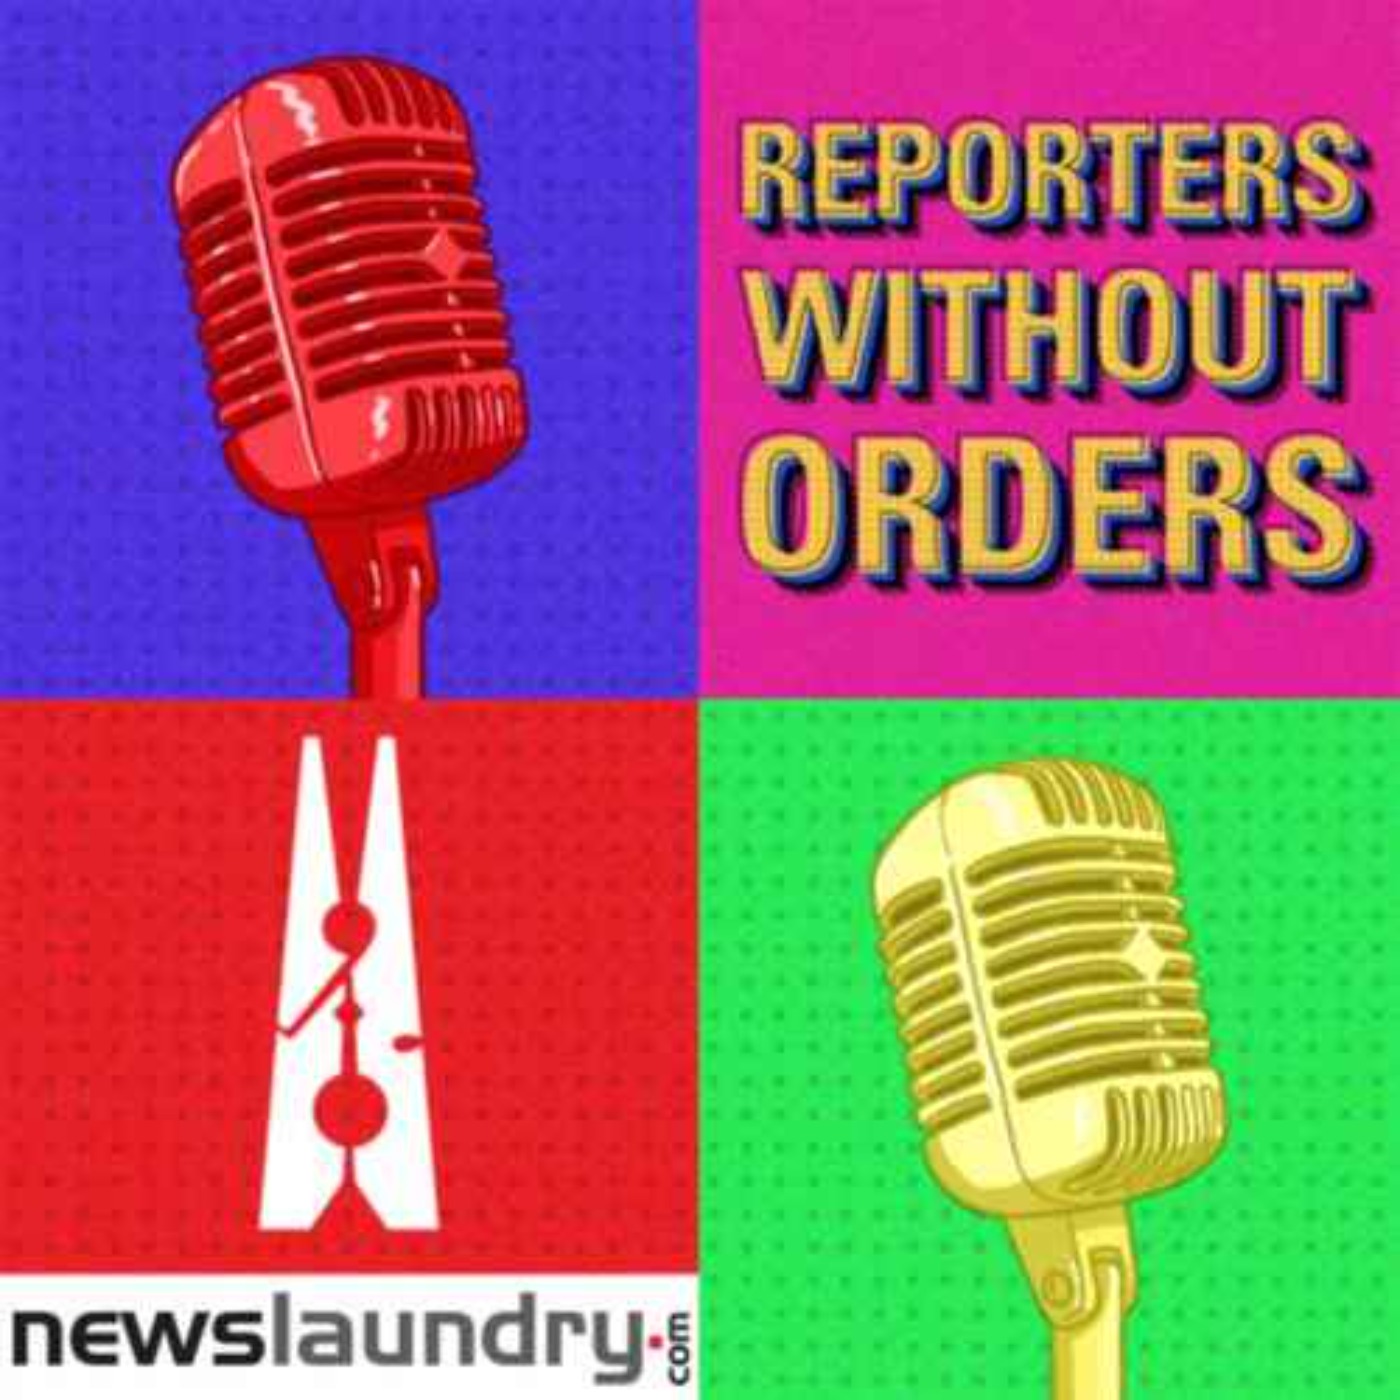 Reporters Without Orders Ep 201: ‘Bulli Bai’ case, hate crimes against Muslim women